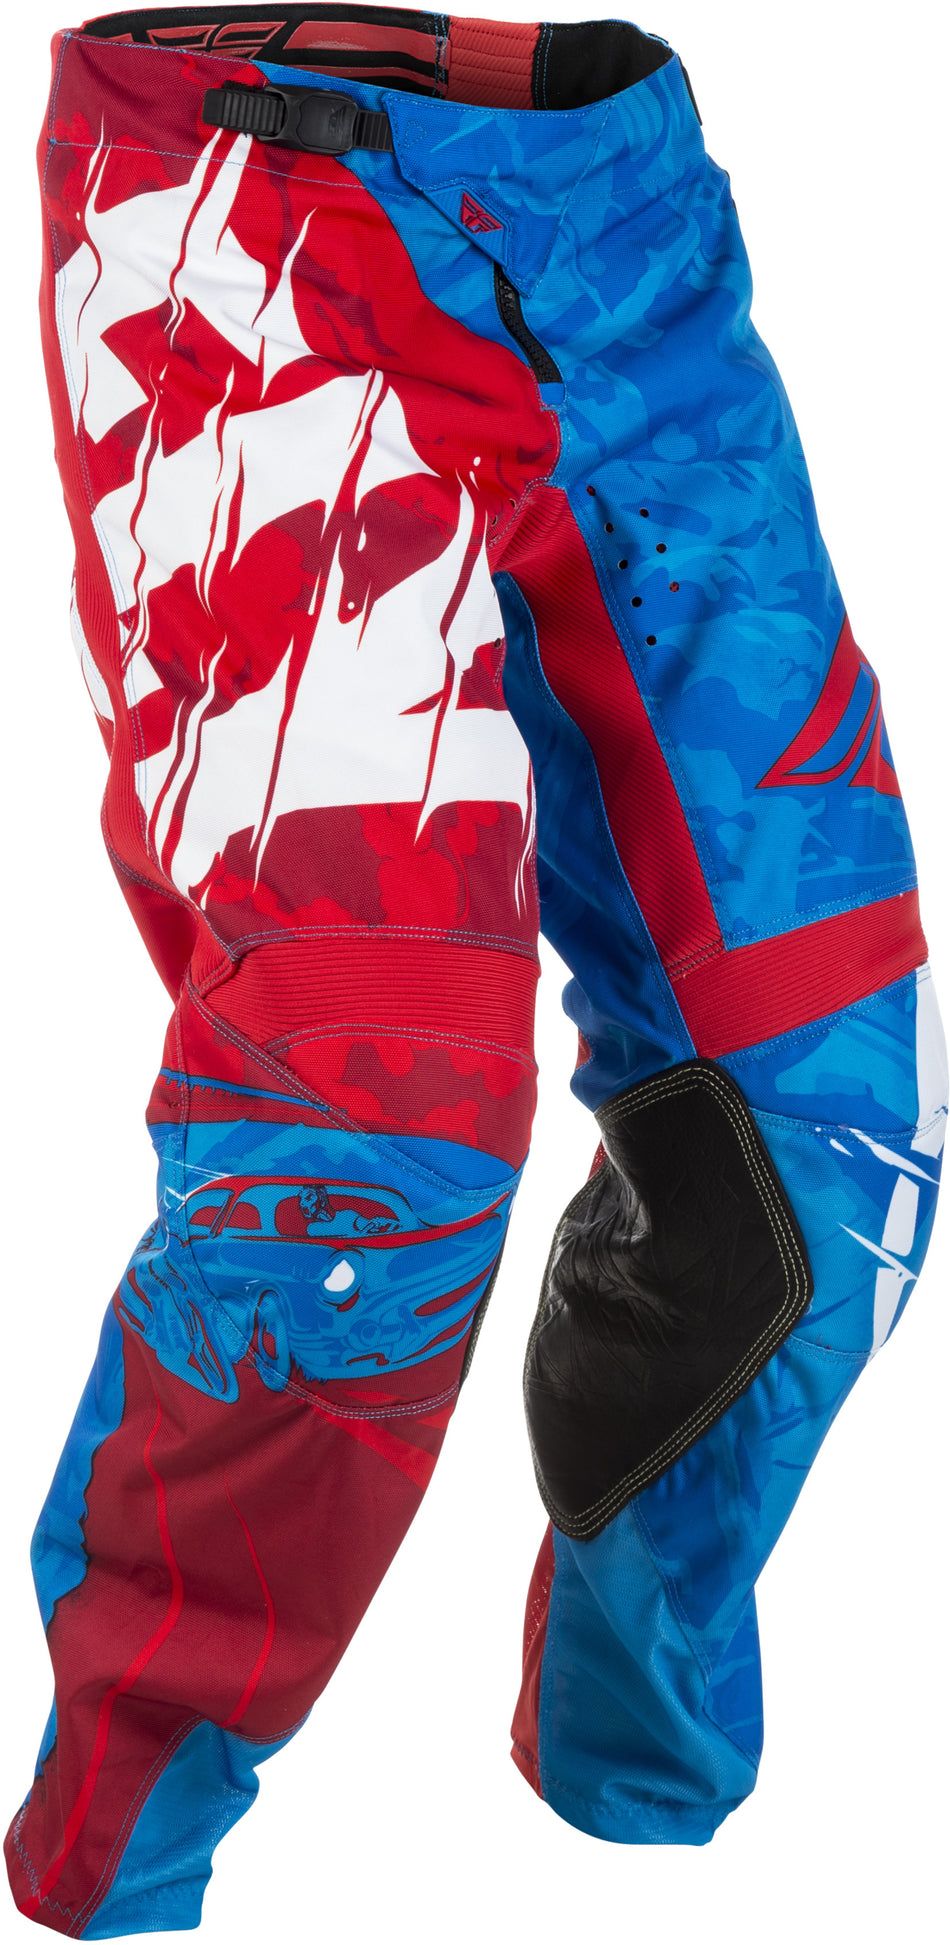 FLY RACING Kinetic Outlaw Pants Red/Blue Sz 18 371-53218